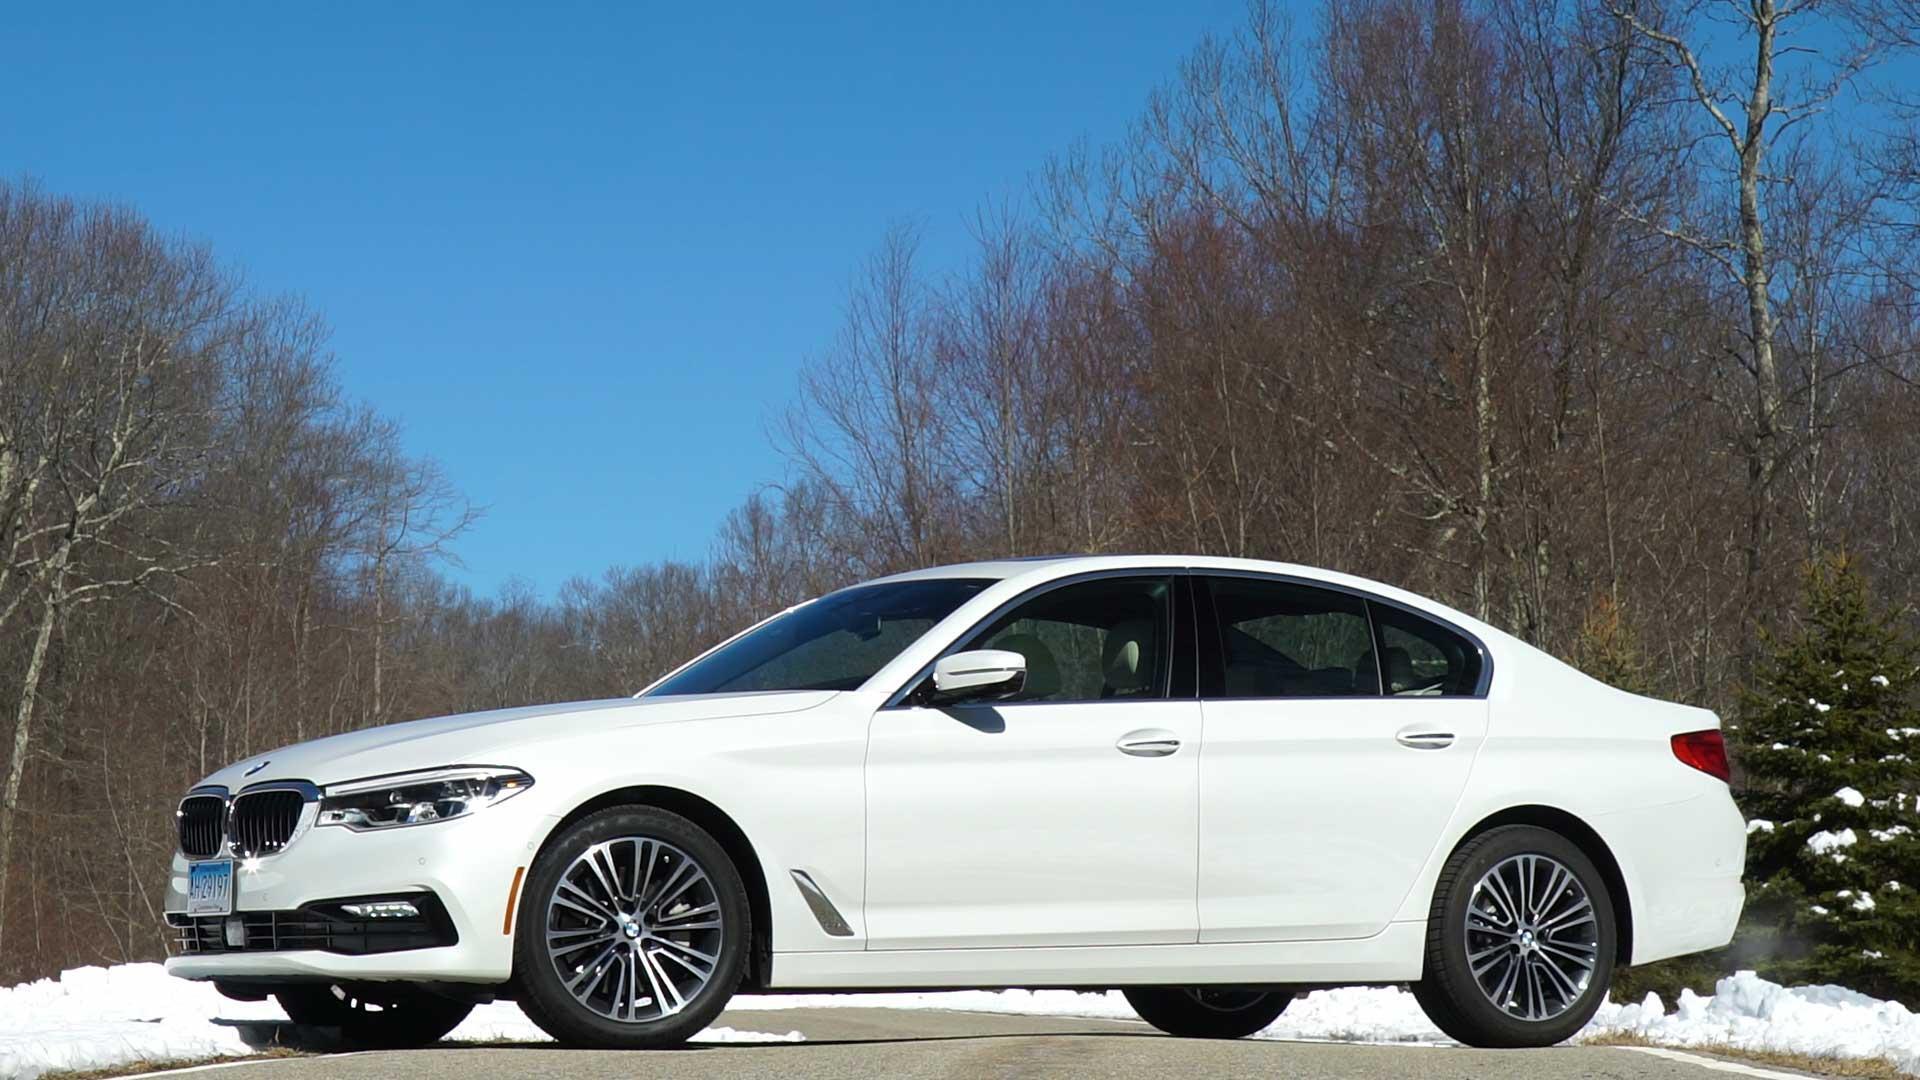 2017 BMW 5 Series First Drive Review - Consumer Reports